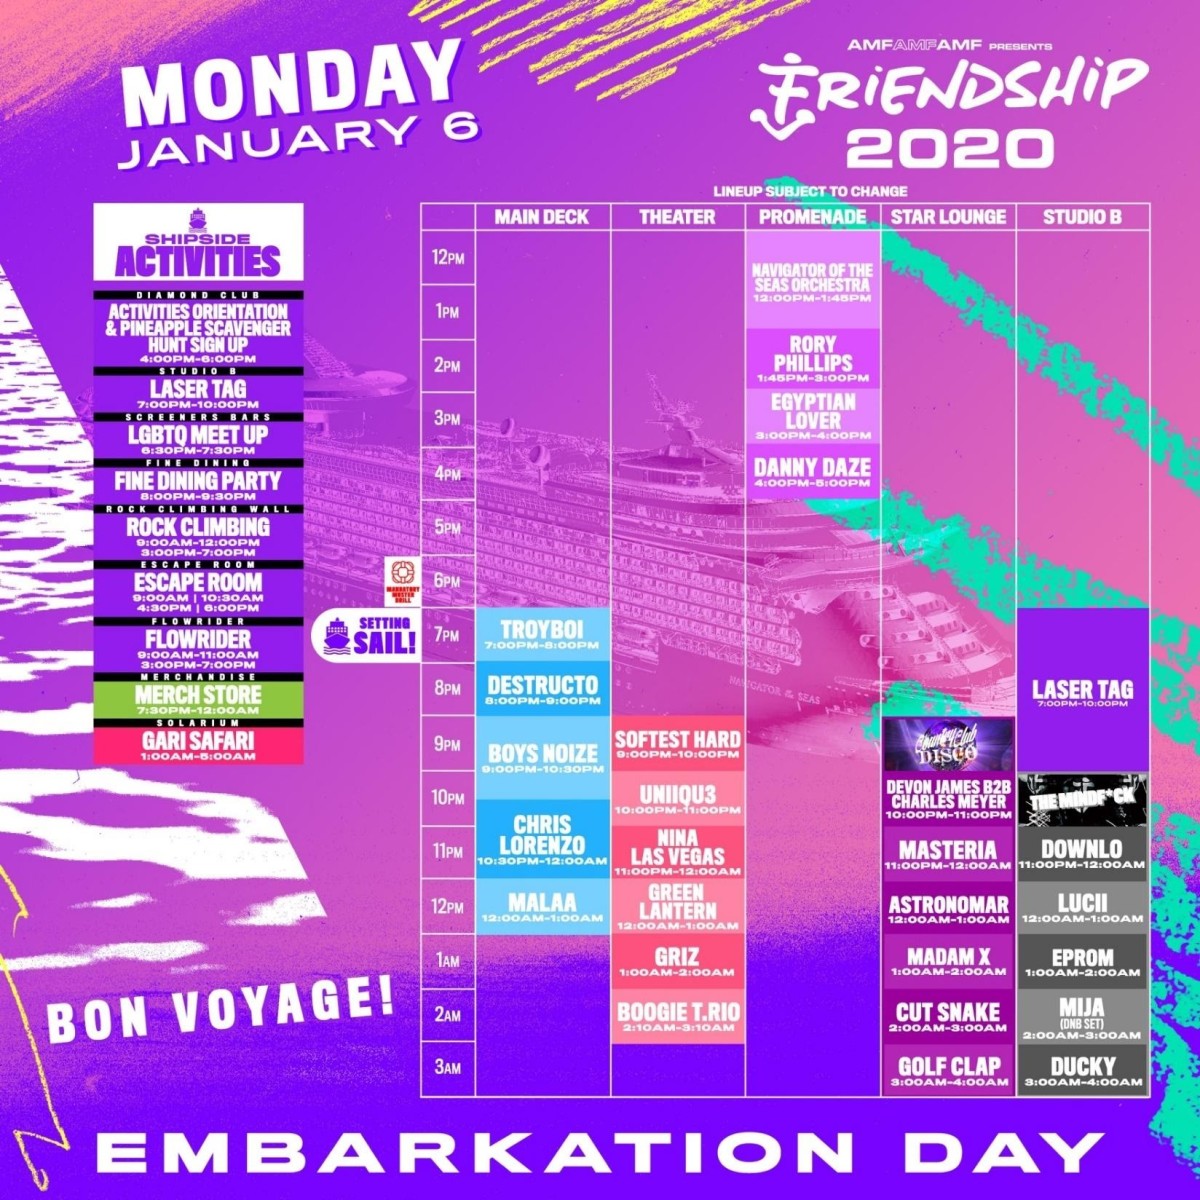 FriendShip 2020 Lineup by Day Monday